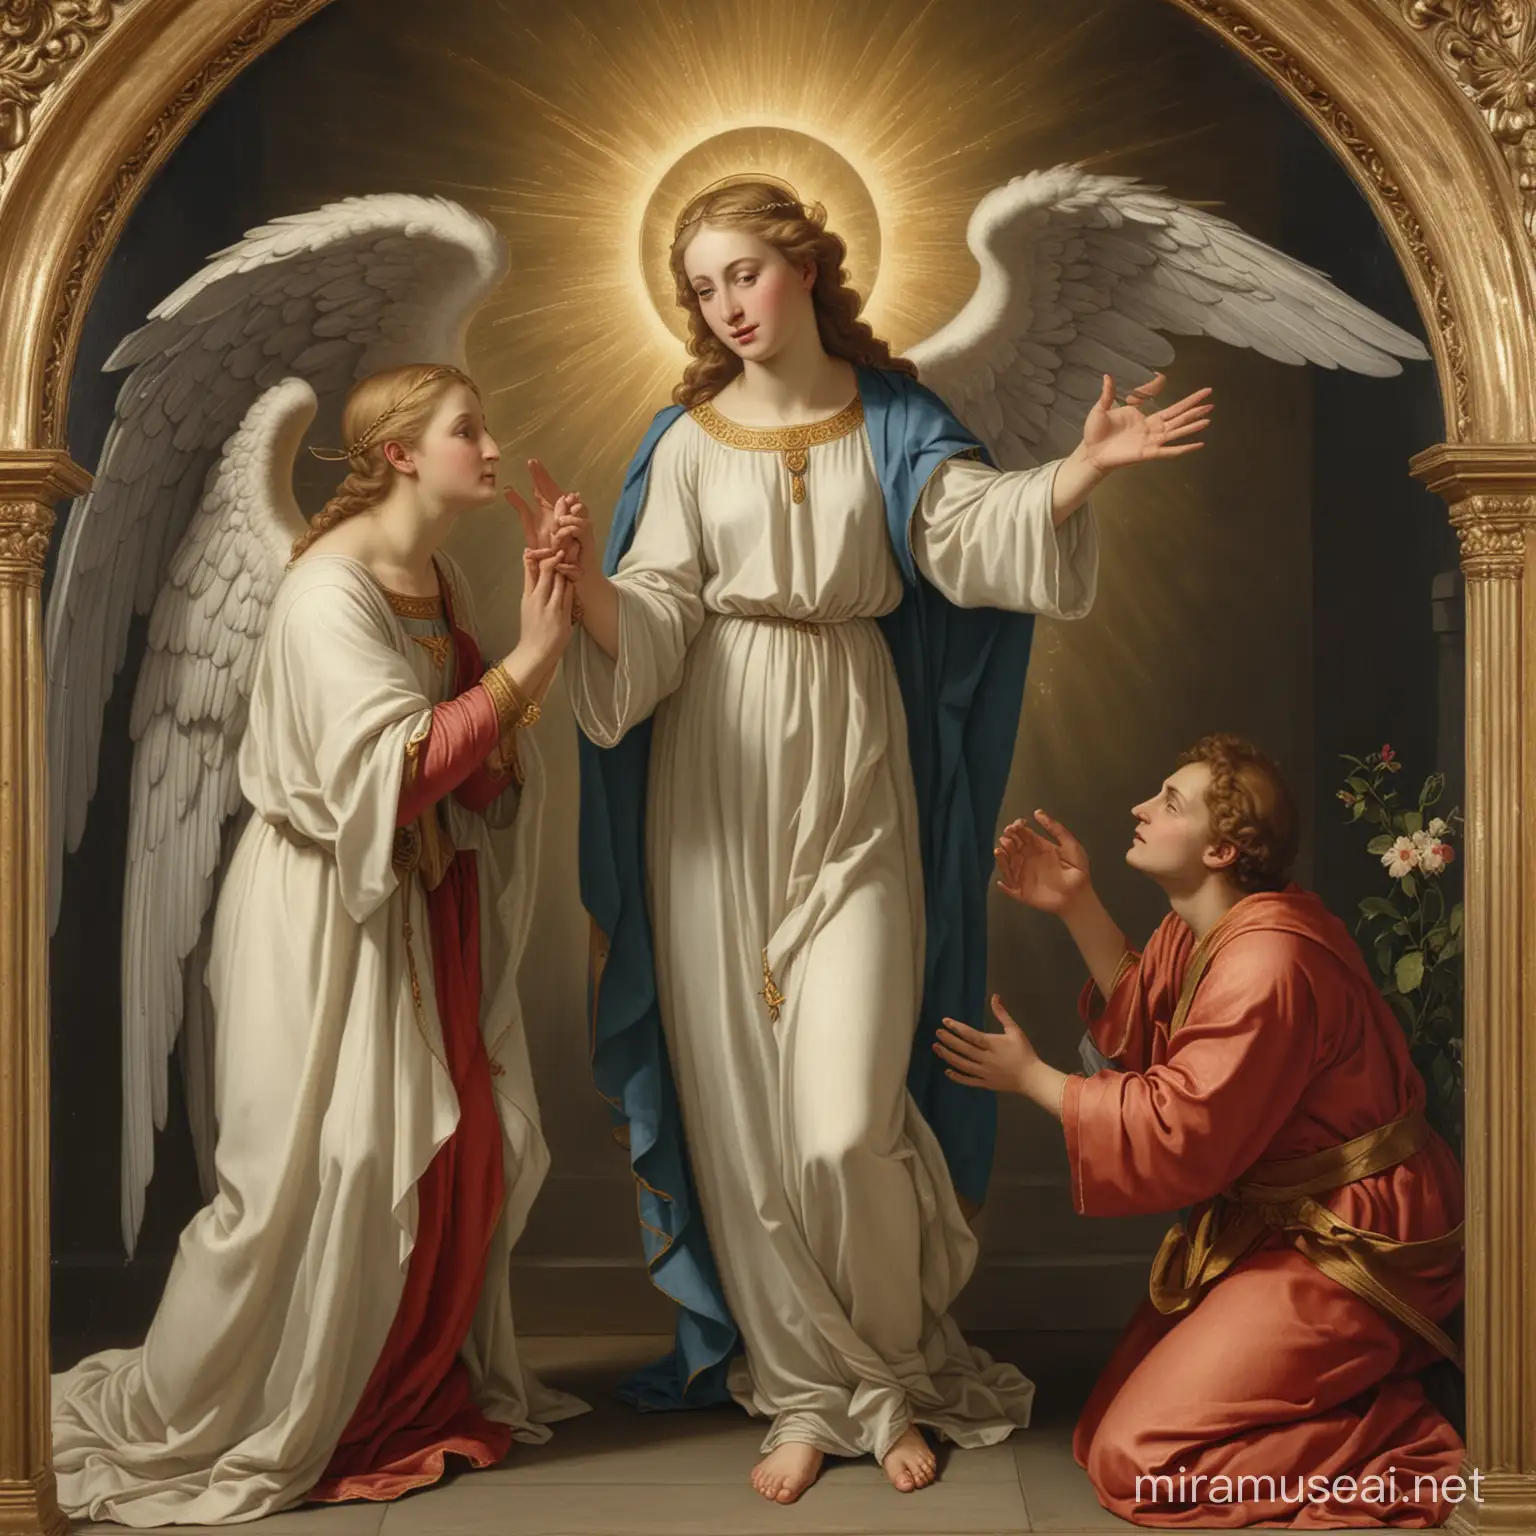 the angel Gabriel announces to the Madonna that she will have a son